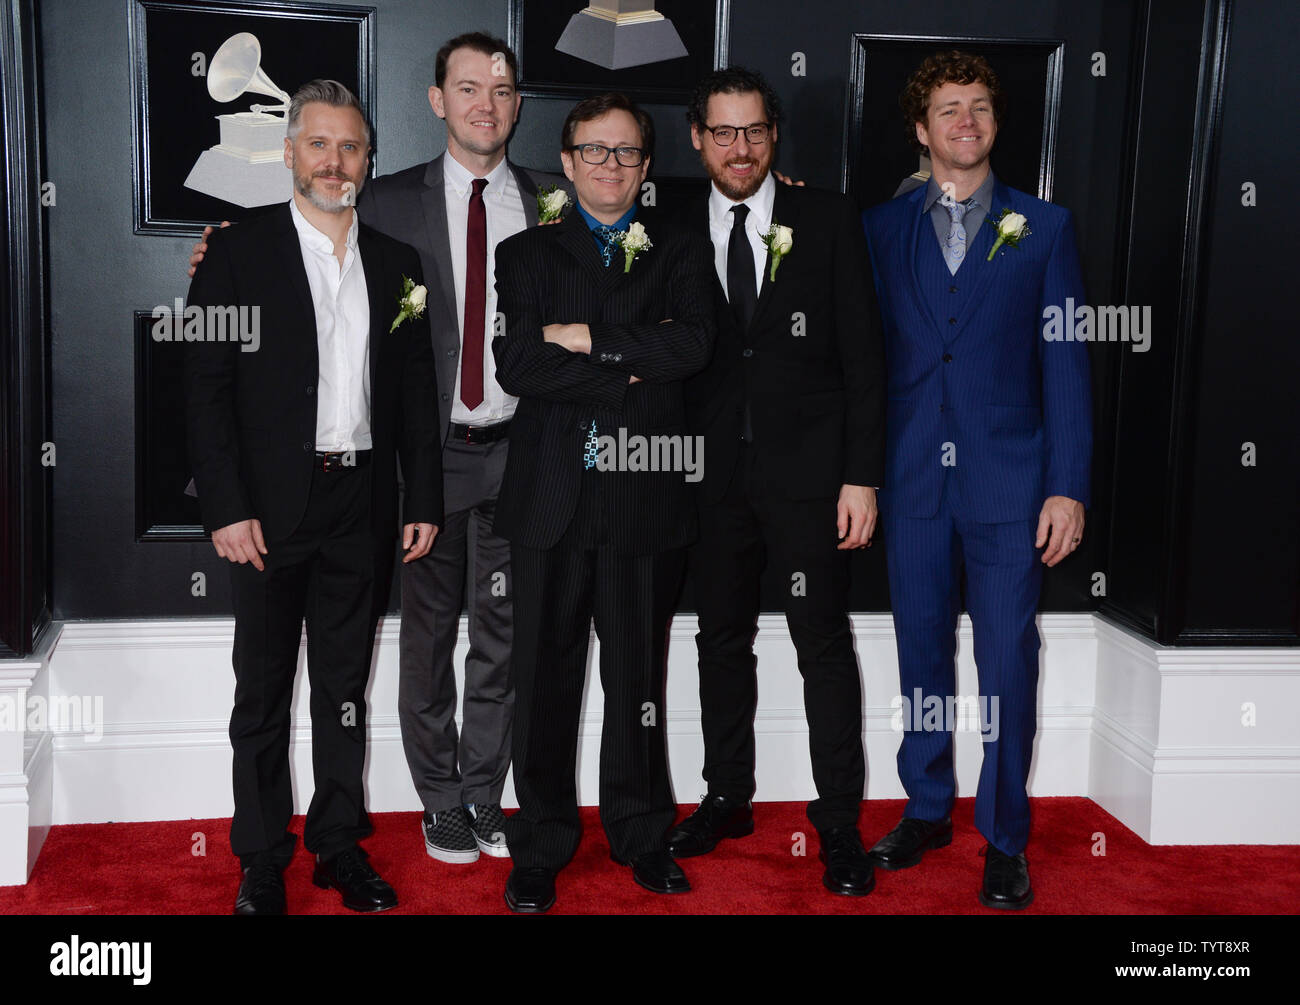 The Infamous Stringdusters arrives on the red carpet at the 60th Annual Grammy Awards ceremony at Madison Square Garden in New York City on January 28, 2018. The CBS network will broadcast the show live from Madison Square Garden in New York City. It will be the first time since 2003 that the ceremony will not be held in Los Angeles.       Photo by Dennis Van Tine/UPI Stock Photo